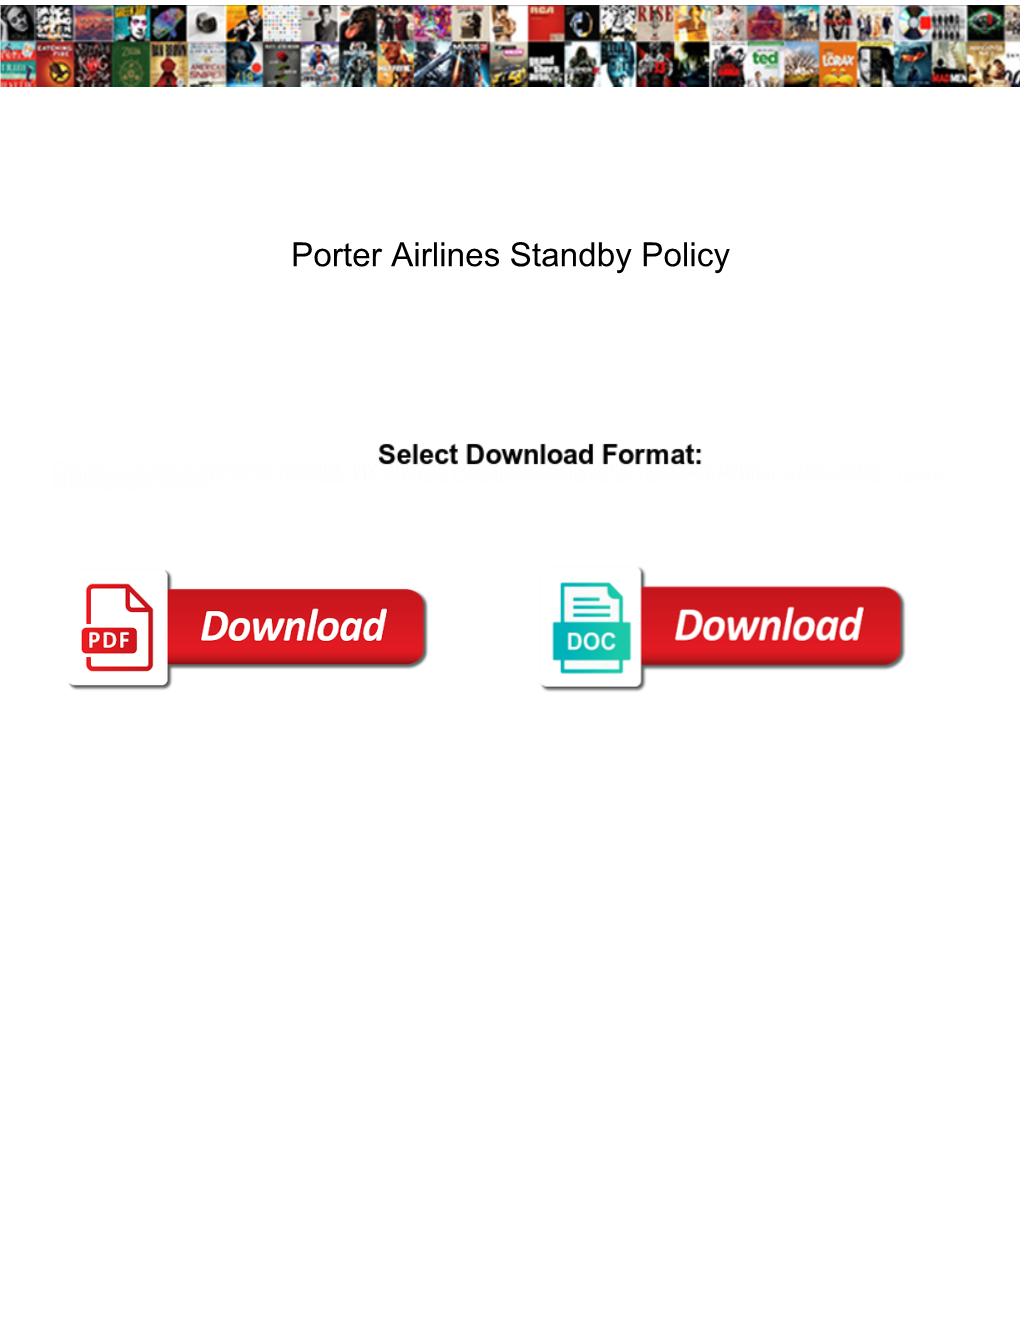 Porter Airlines Standby Policy